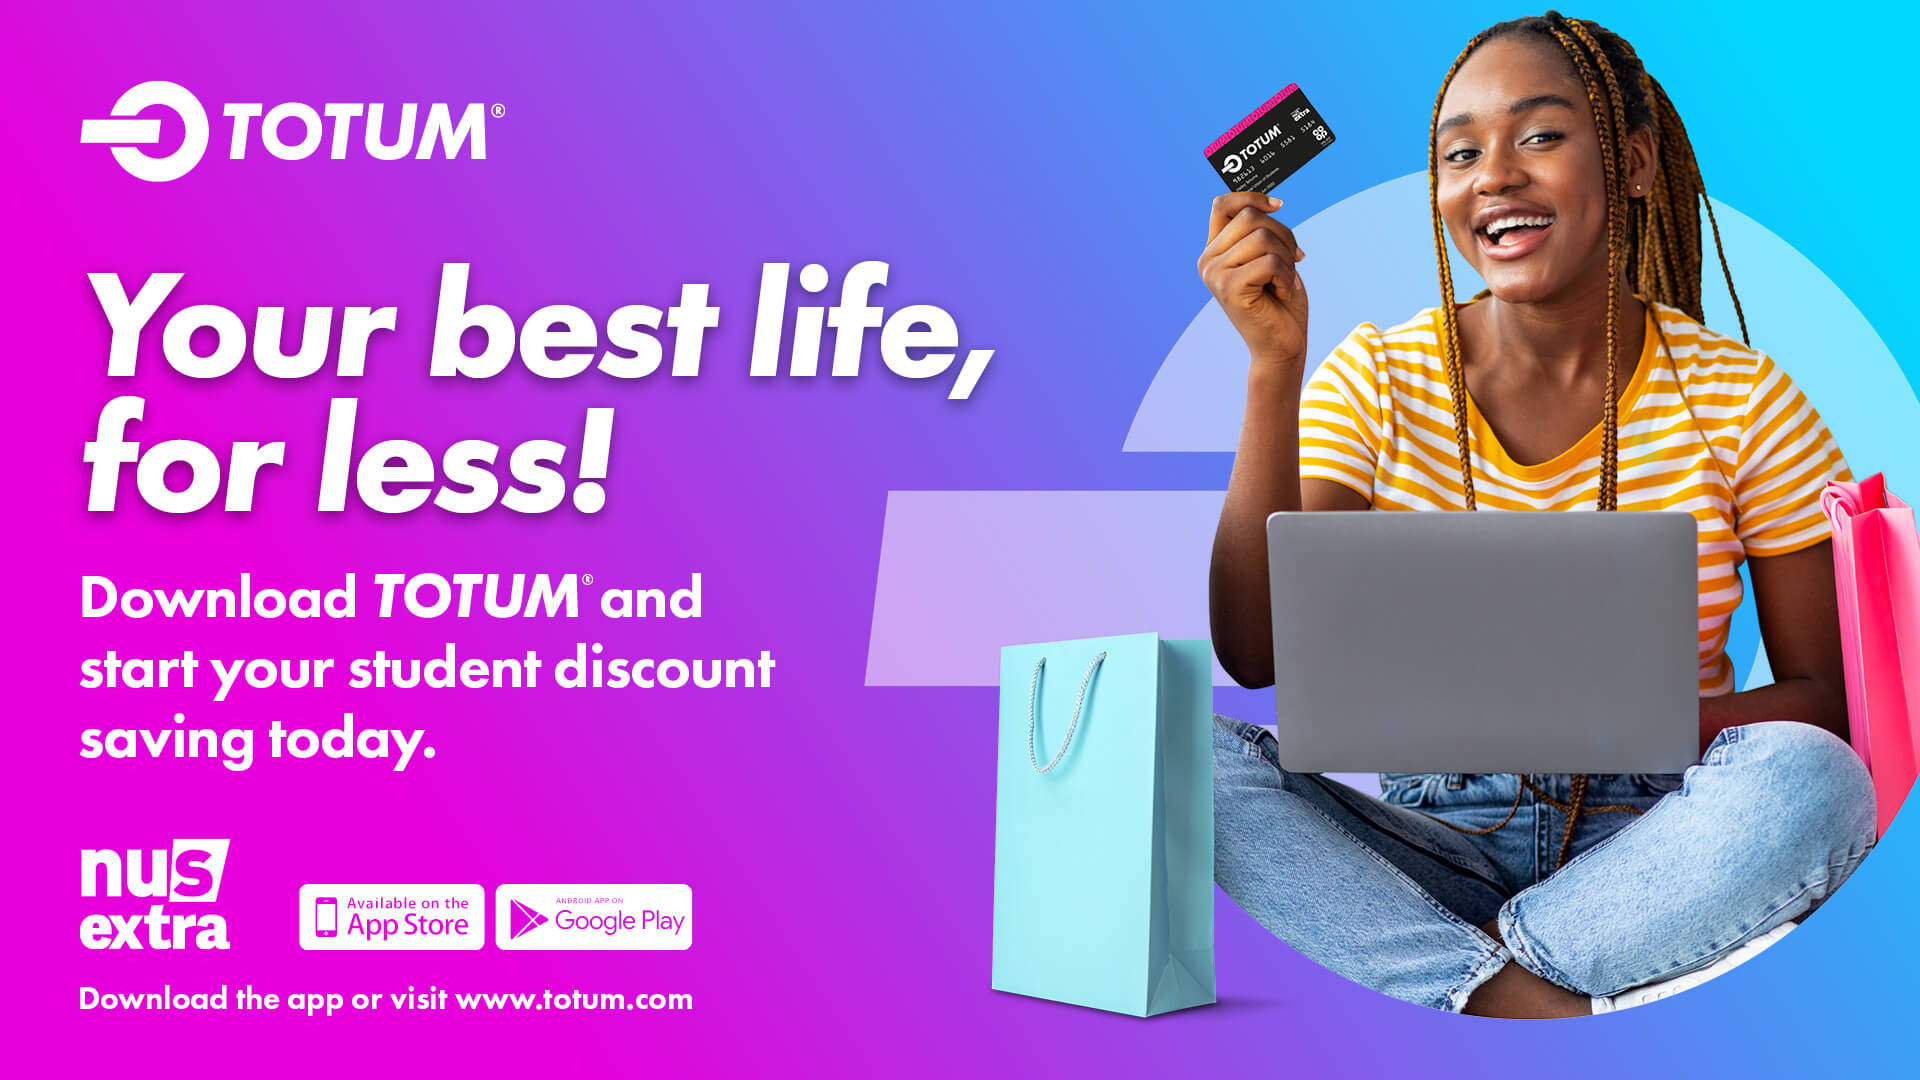 Live your best life for less with Totum